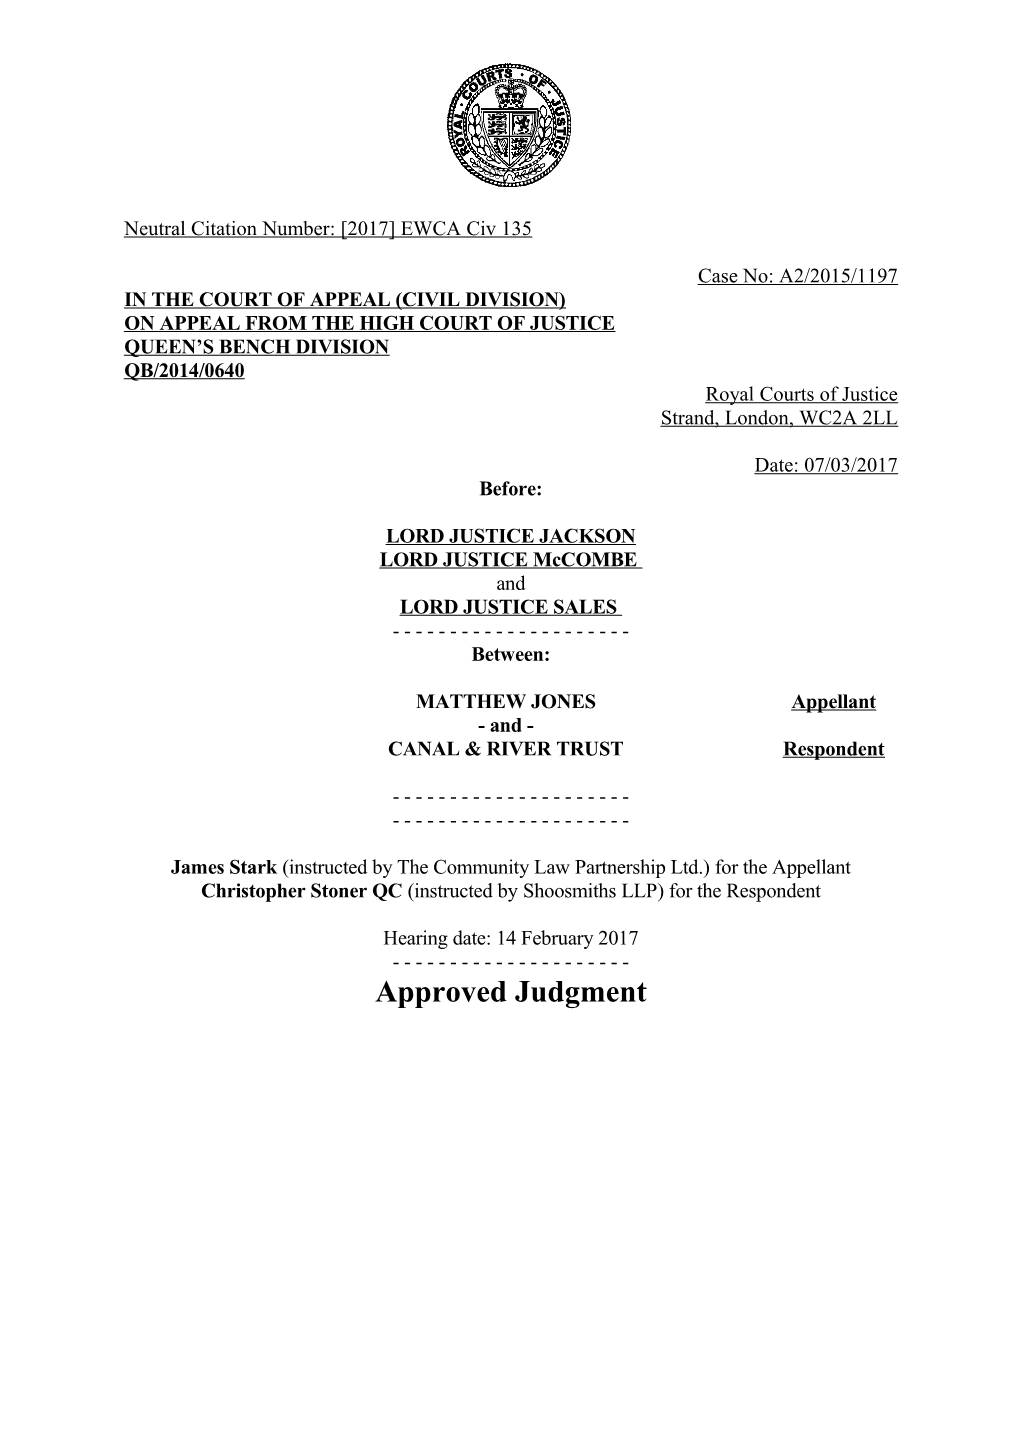 Court of Appeal Judgment Template s10